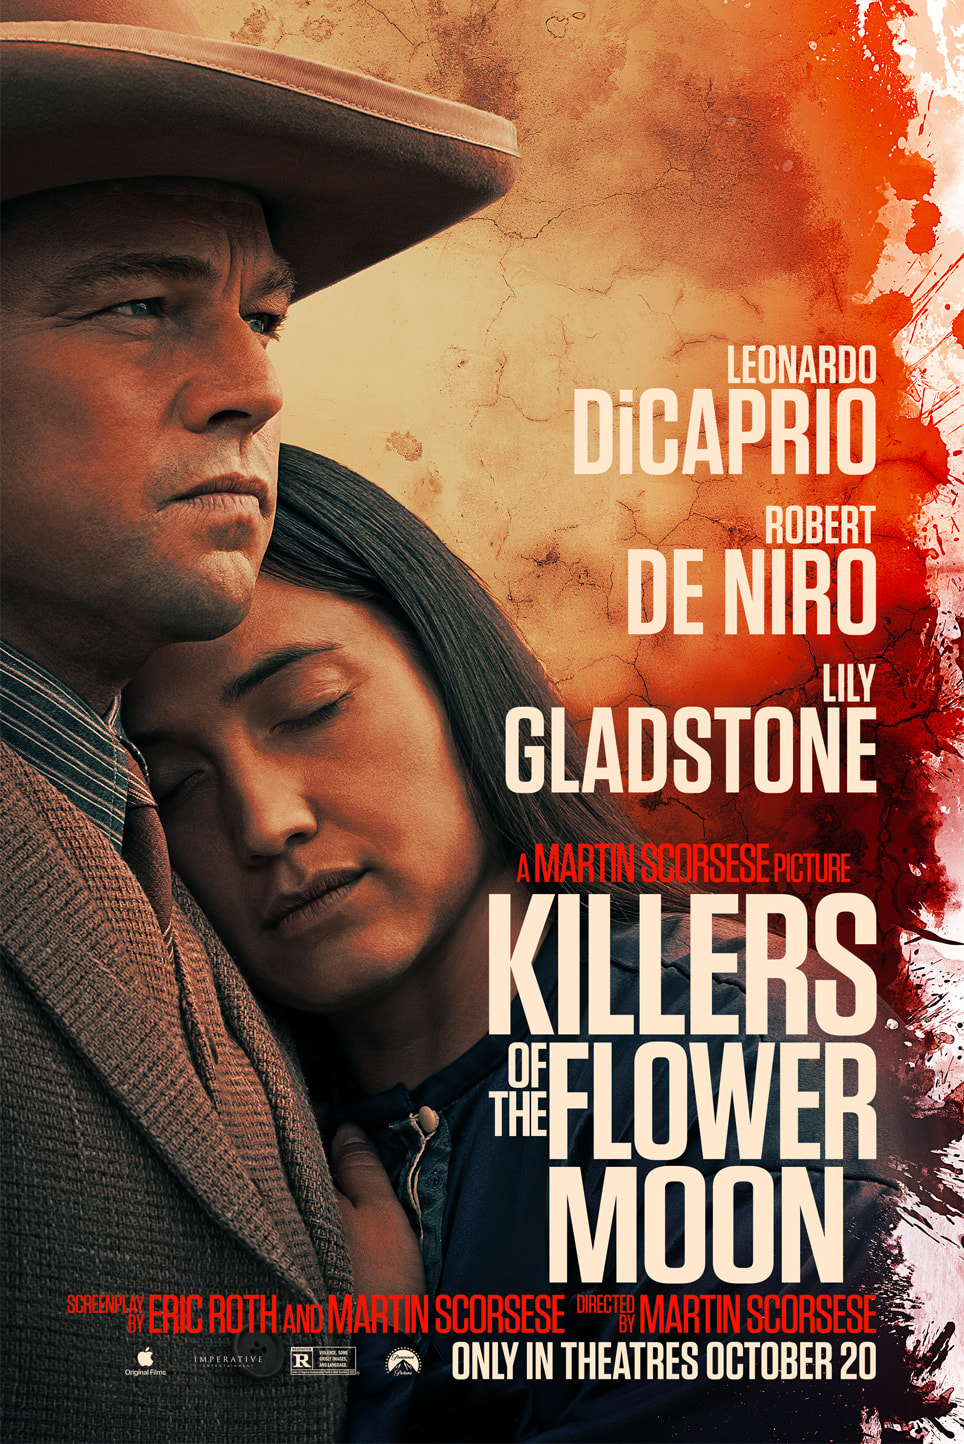 Martin Scorsese’s “Killers of the Flower Moon” premieres globally on Apple TV+ after theatrical run